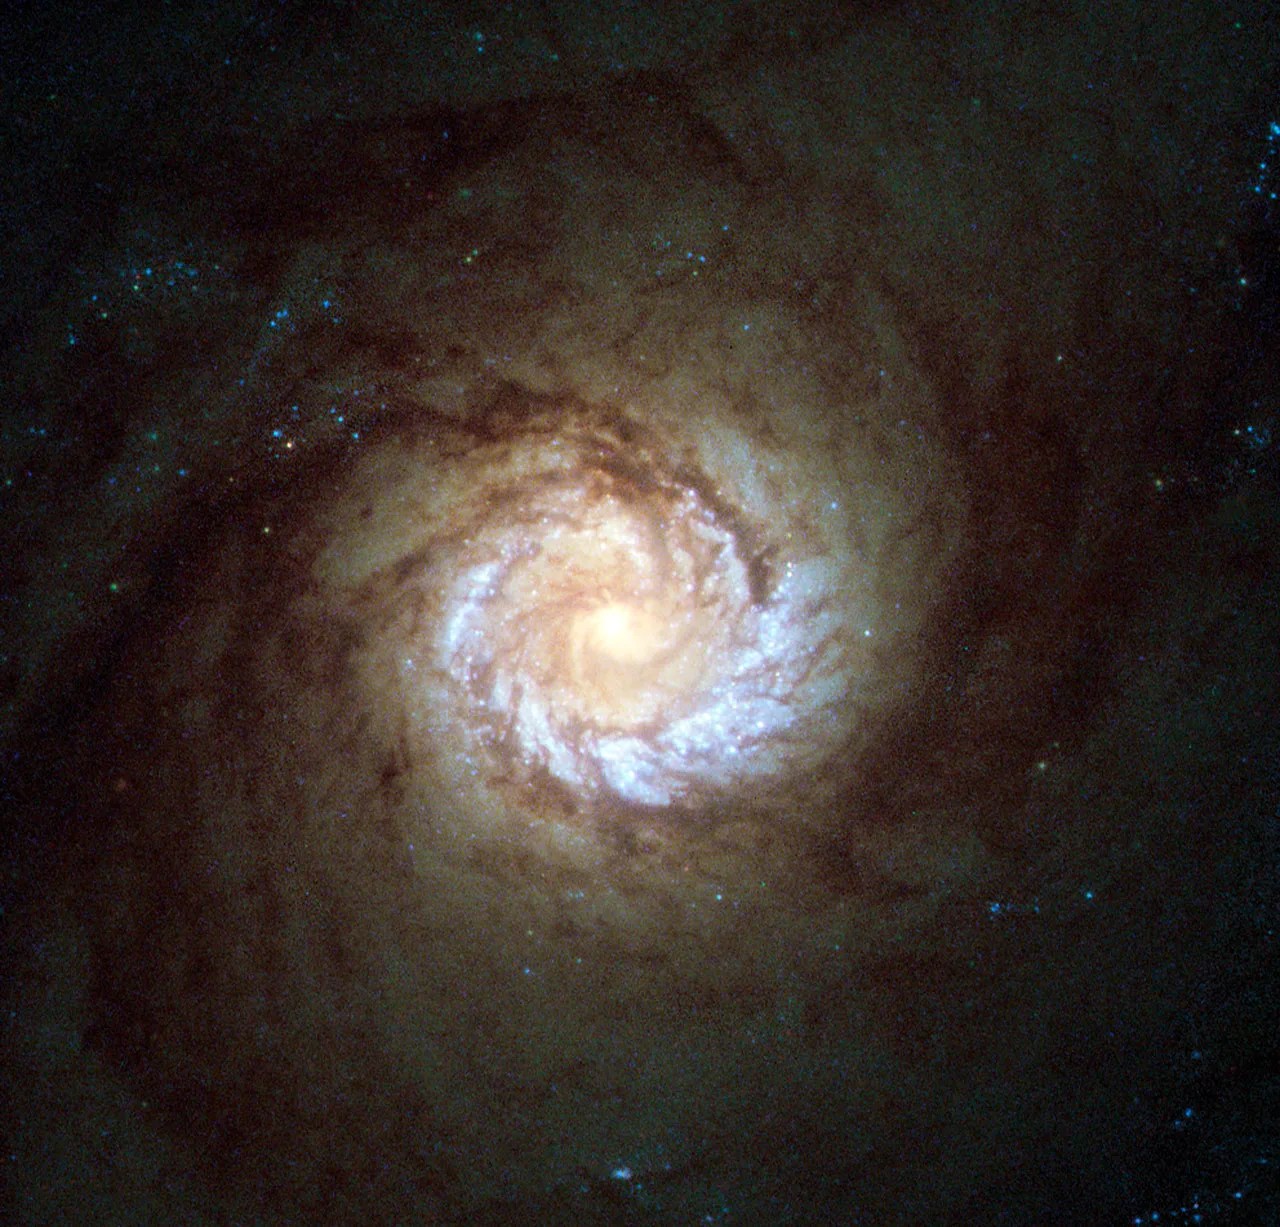 A dusky spiral galaxy with a close in swirl of bright blue stars